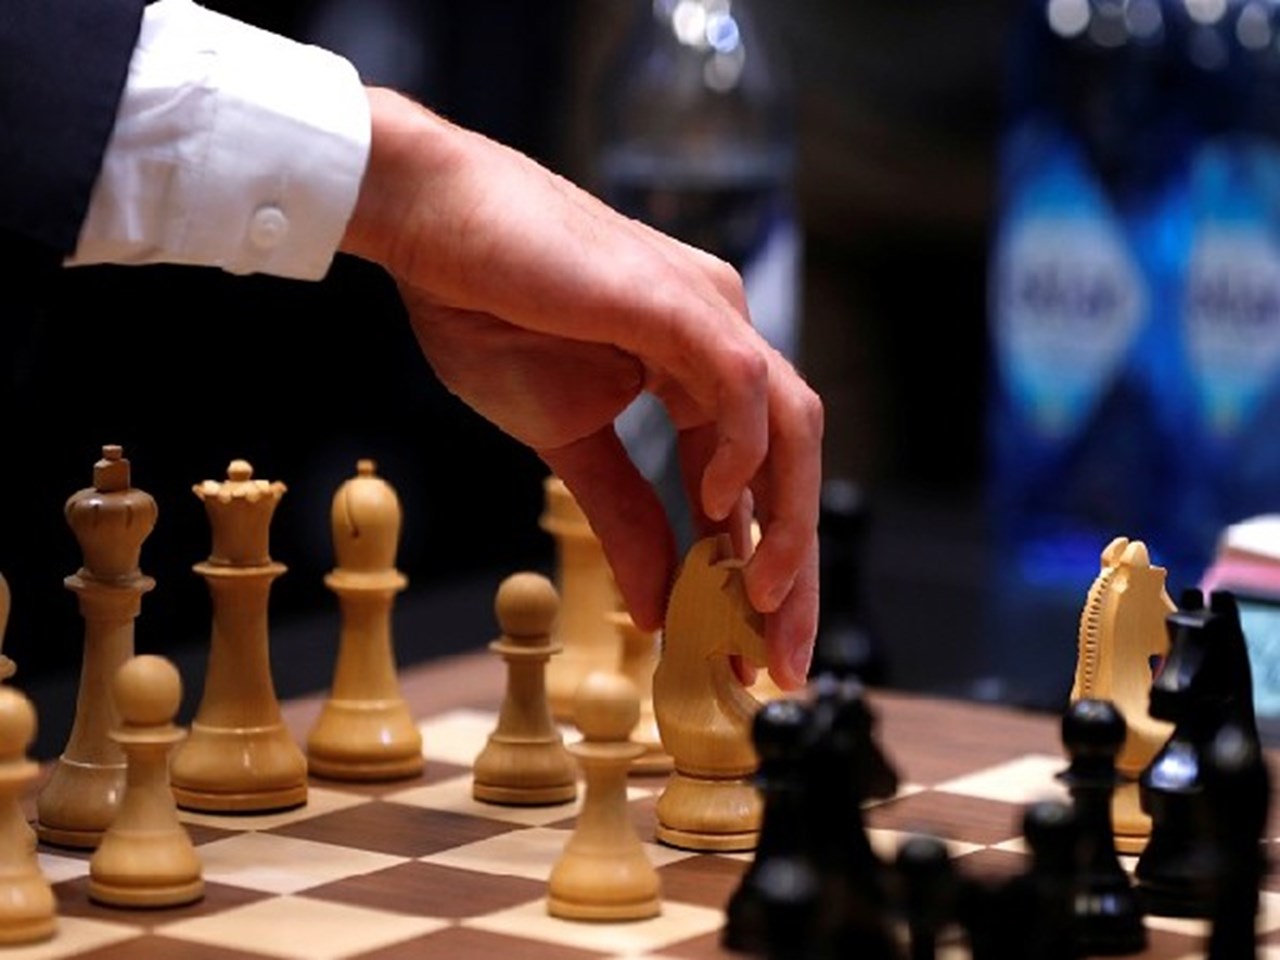 Gukesh replaces Viswanathan Anand as India's top chess player